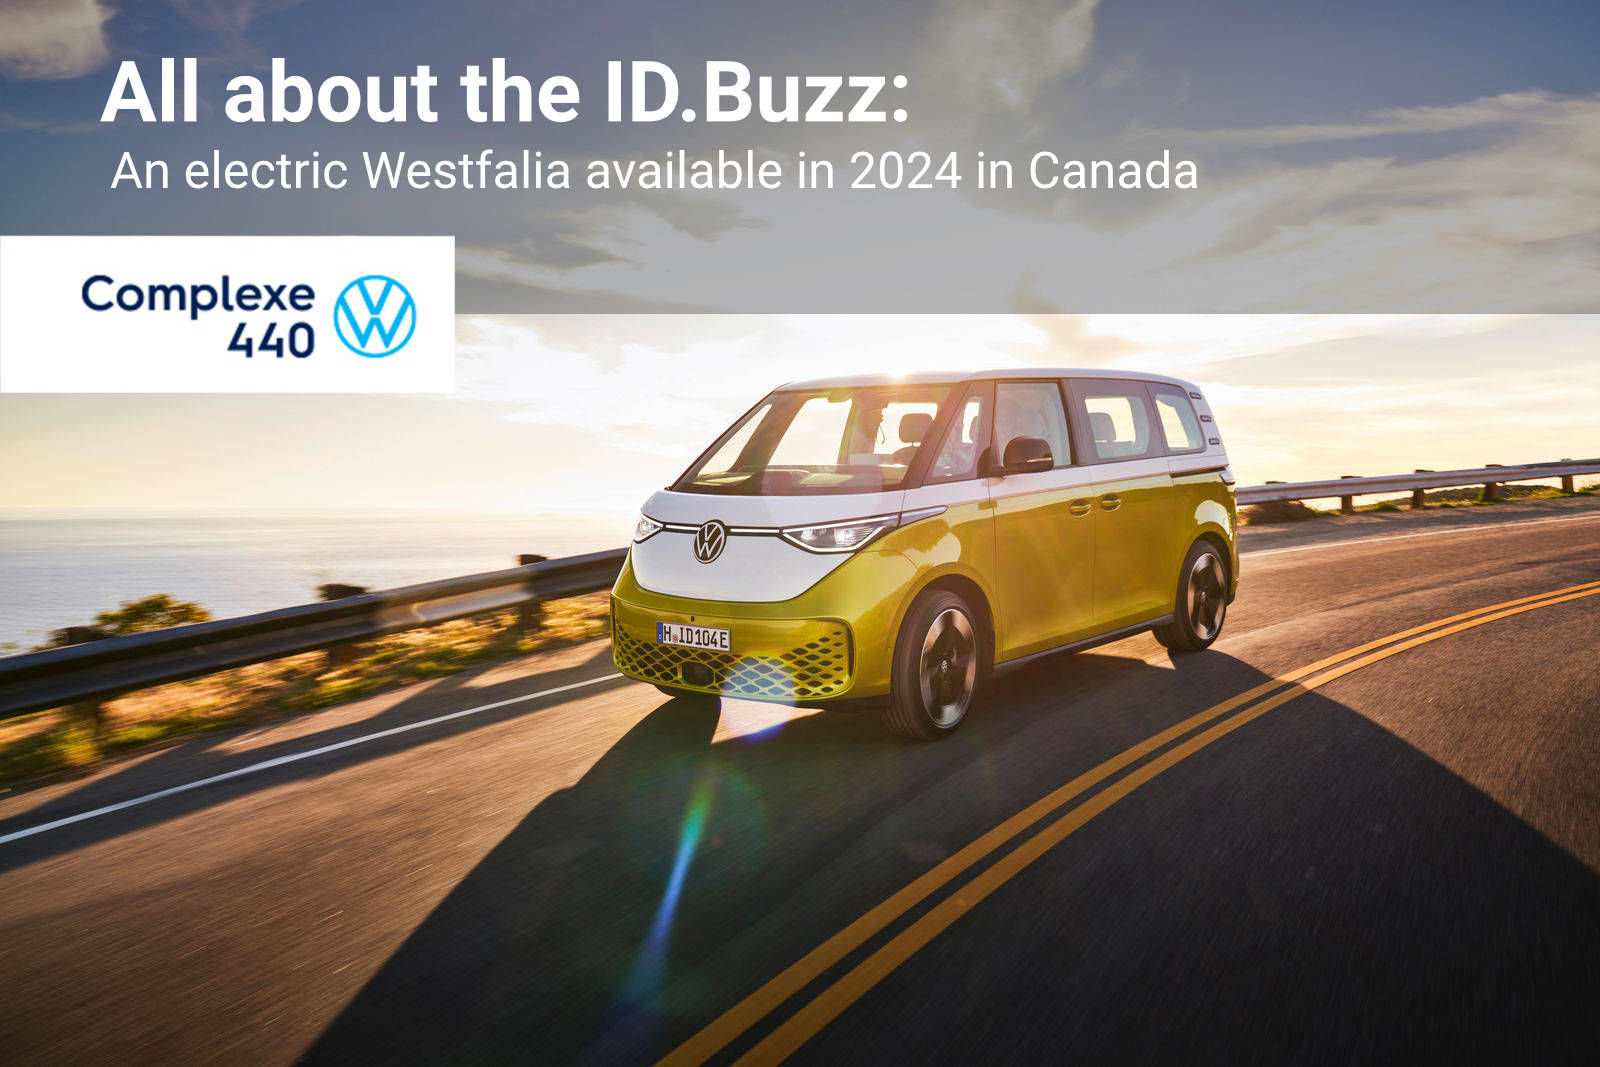 Specs and price of the iD.Buzz, an electric Westfalia!